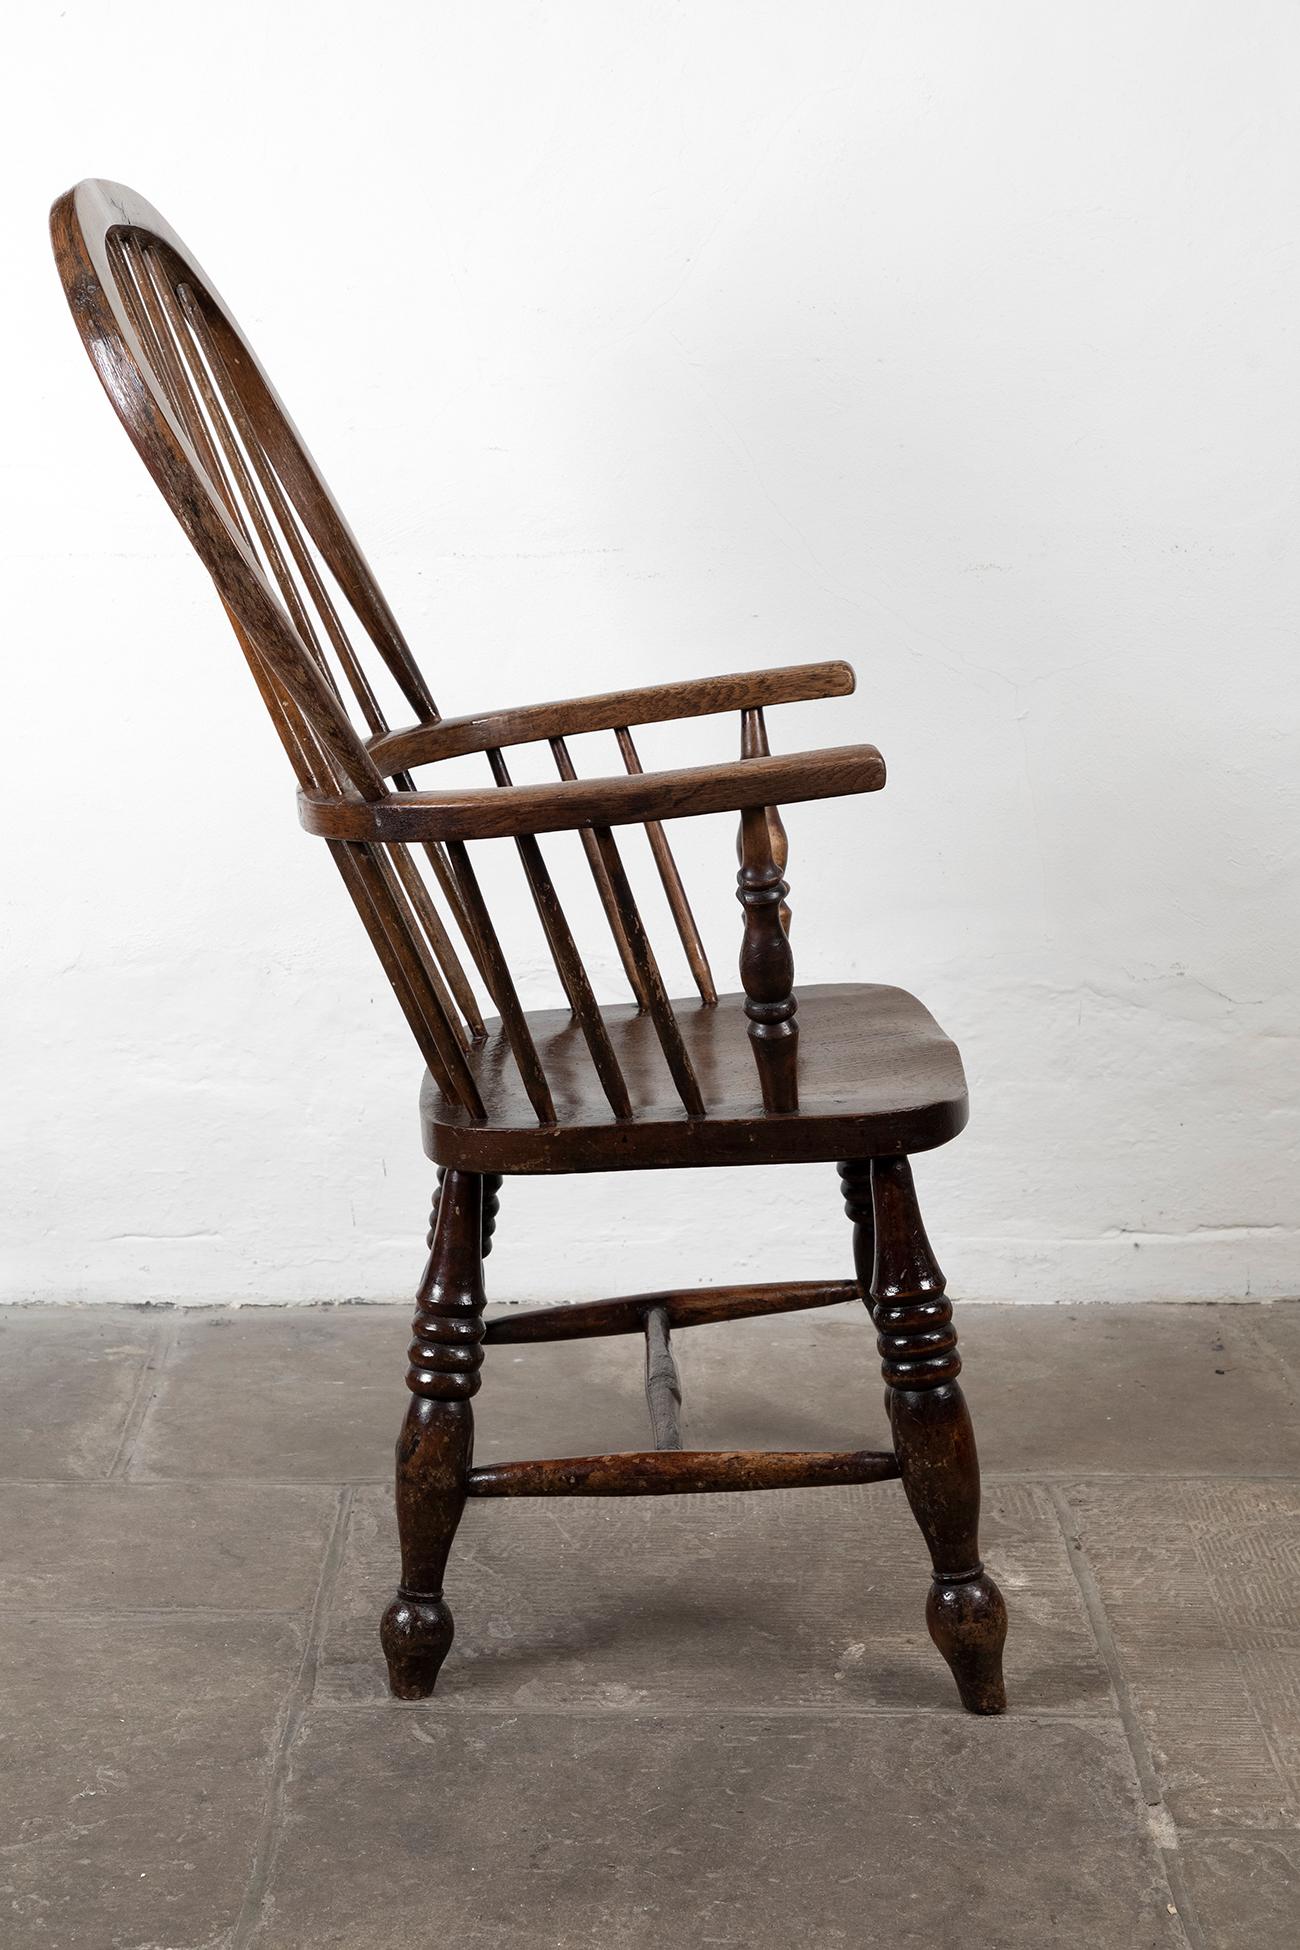 Wonderful 19th century British Windsor hoop back armchair in elm and ash. With remnants of original paint on the arms and back rest, a stunning piece.

Circa, 1860

Additional Information:
H 117 cm (H 46 inches)
W 54 cm (W 21.2 inches)
D 41